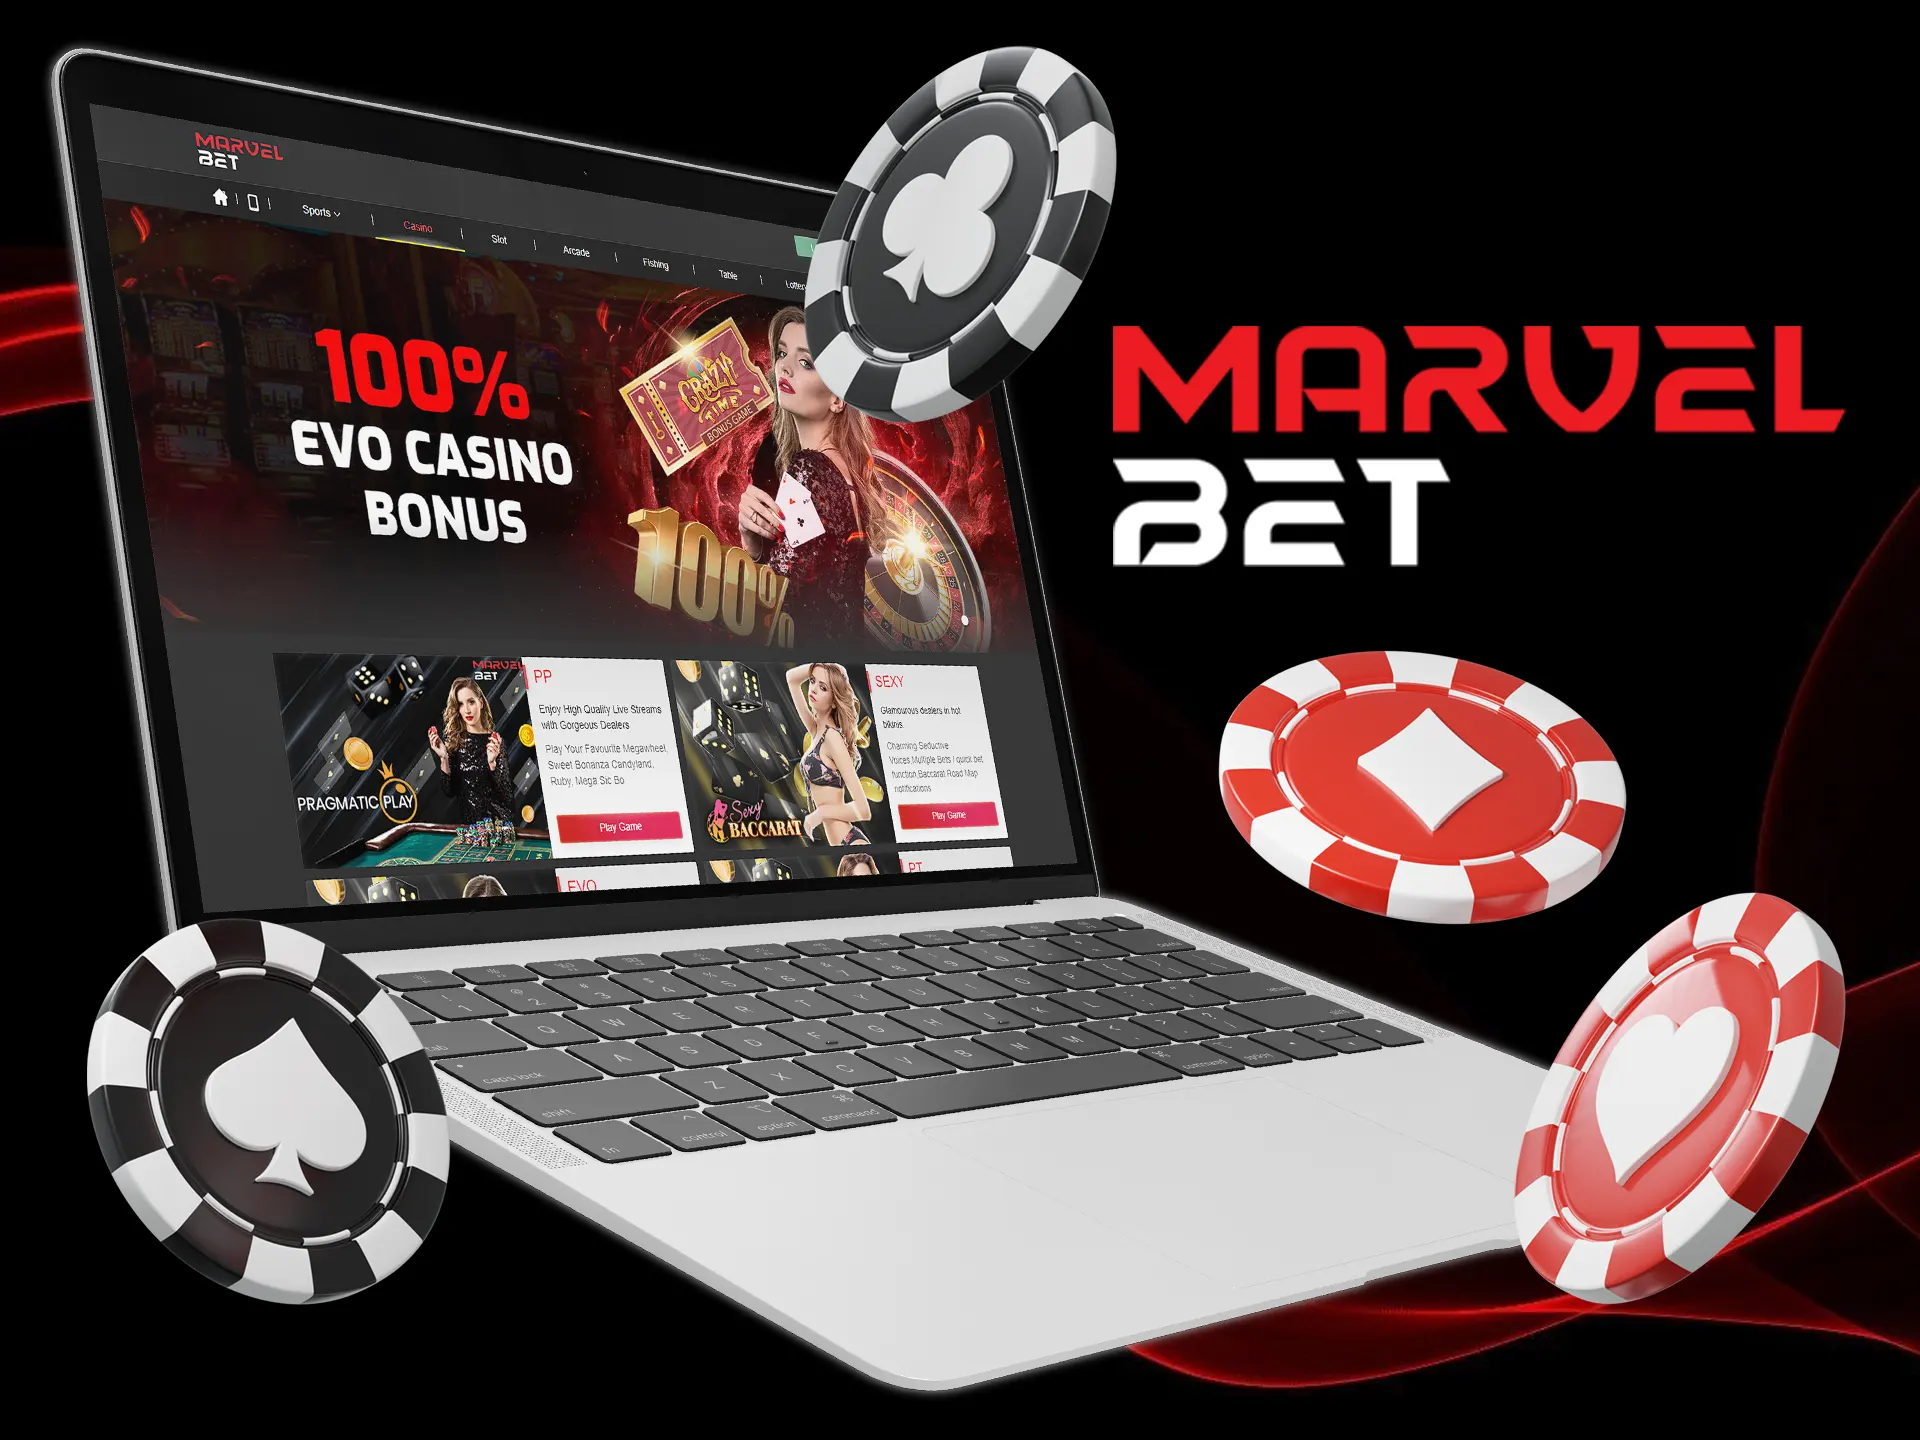 Open the Marvelbet website and enter on the casino page.